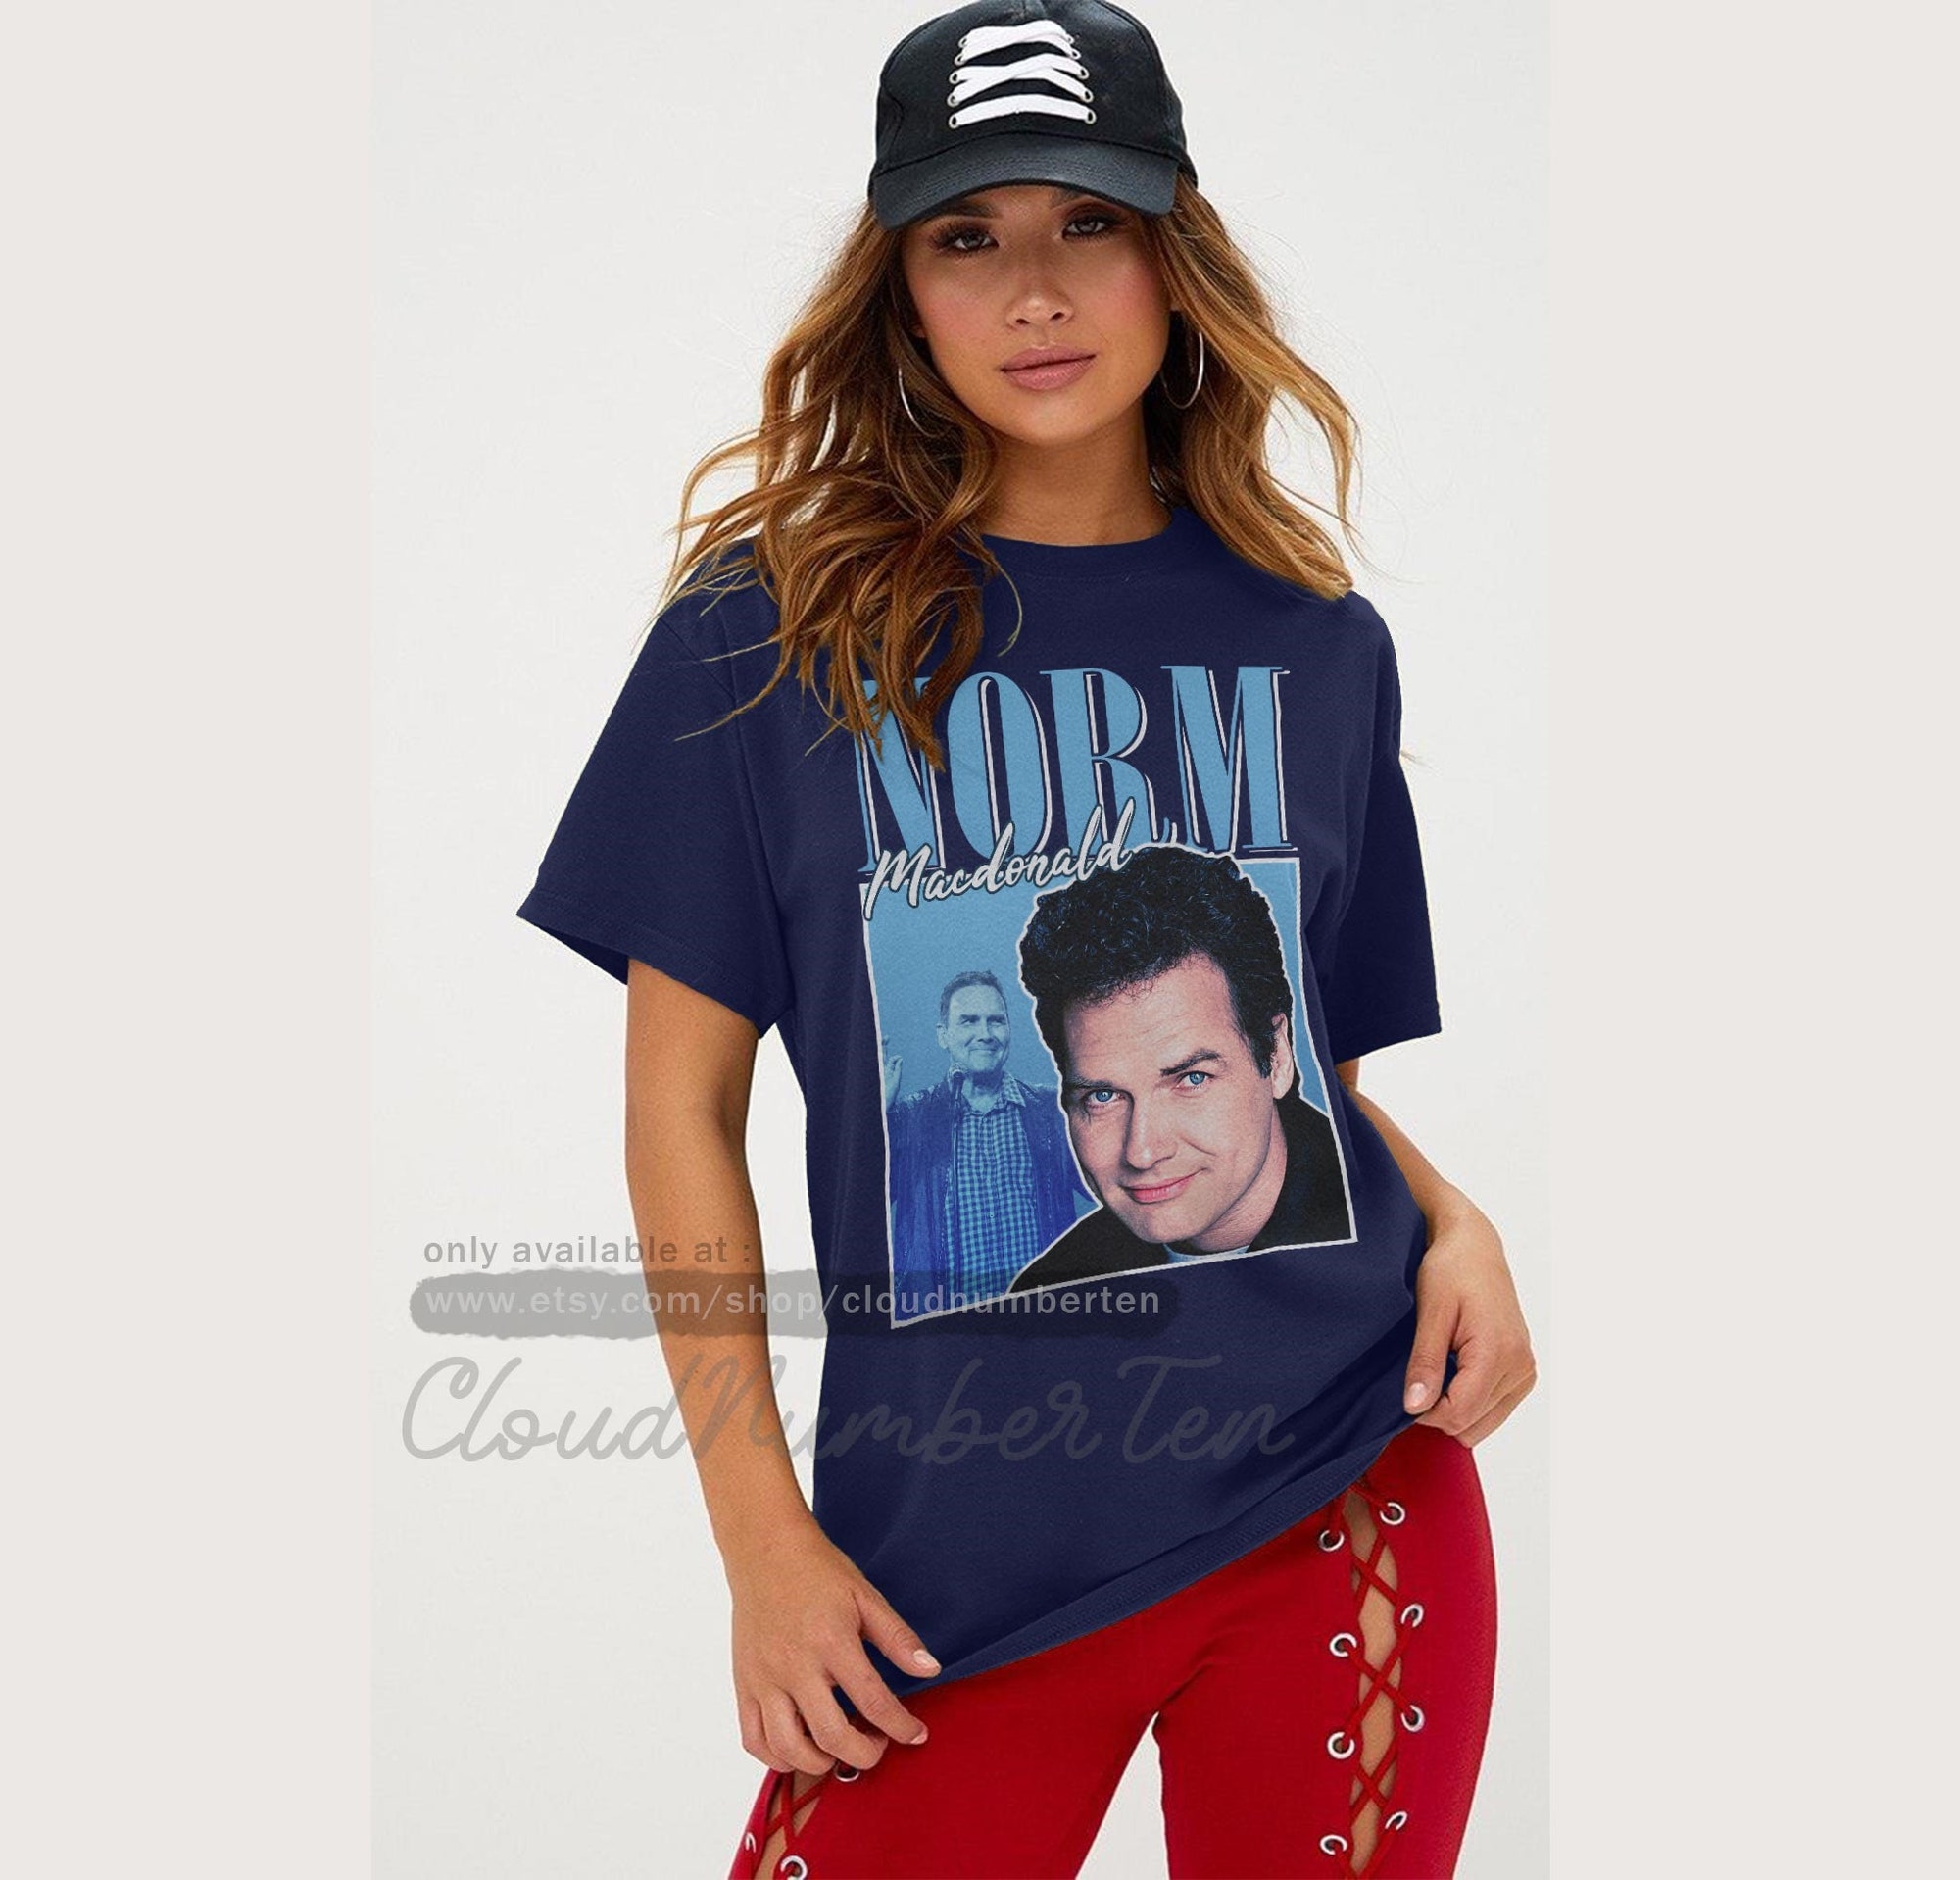 Discover Norm Macdonald shirt retro 90s poster tee vintage style t-shirt